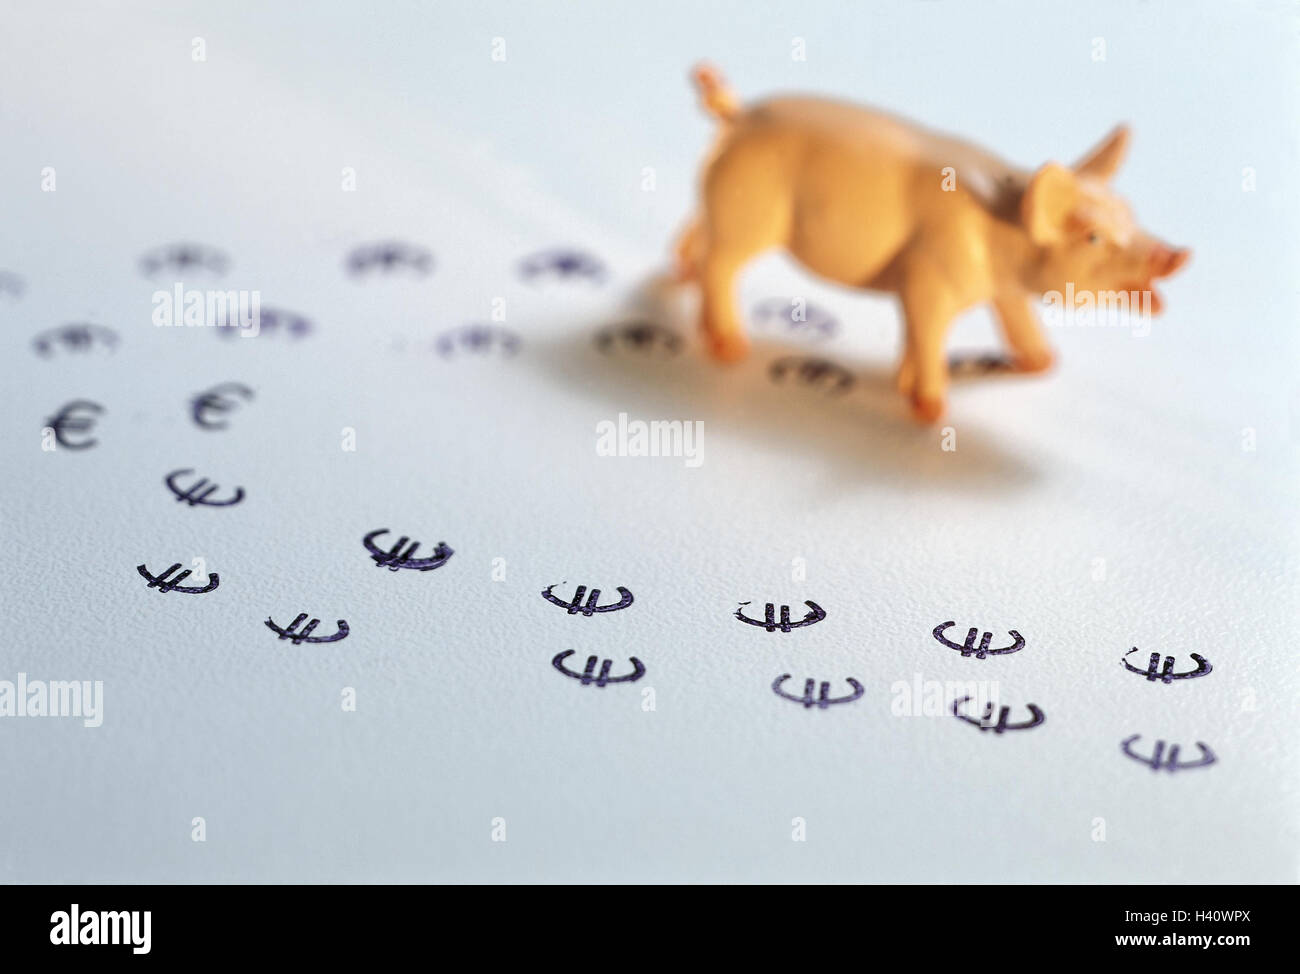 Icon, European monetary union, luck pig, footprints, euro-characters, Still life, economy, currency unit, single currency, introduction, currency, the EU, European, means payment, pig, euro, impressions, luck, positively, studio Stock Photo